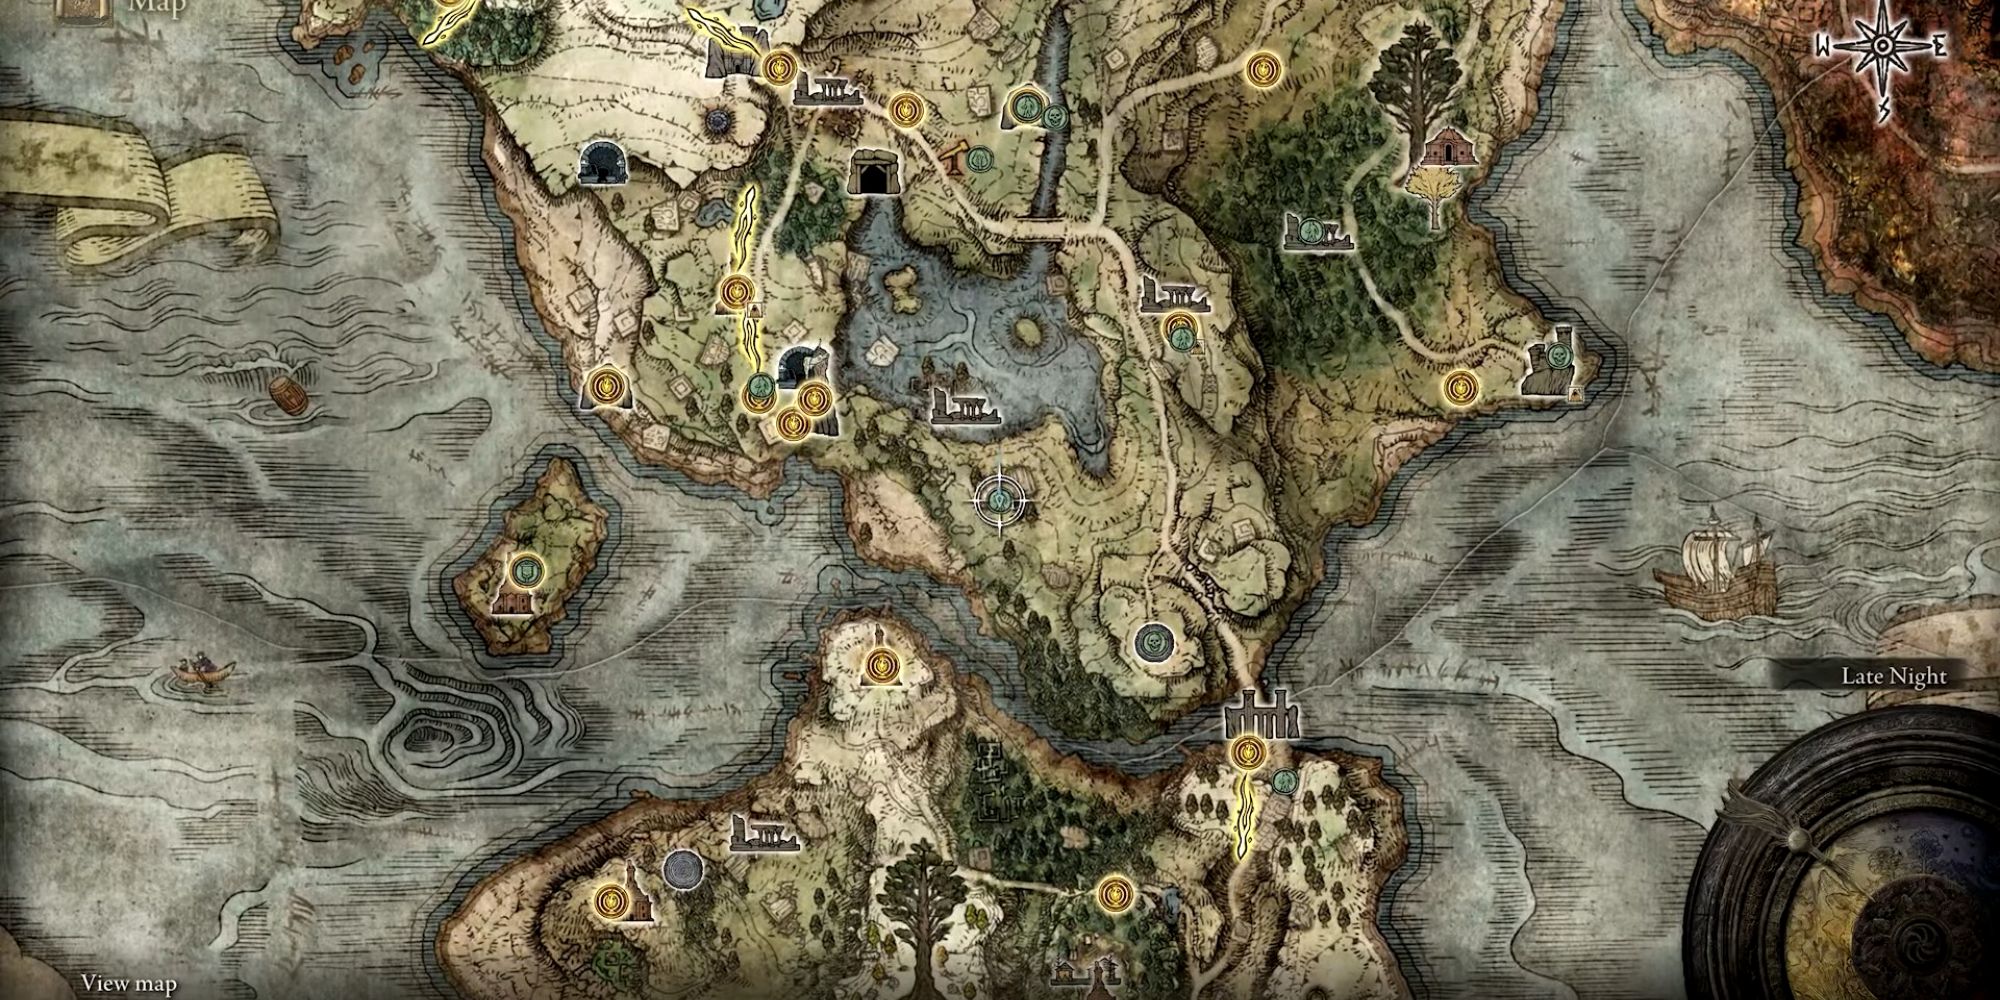 Yura's first location on the elden ring map